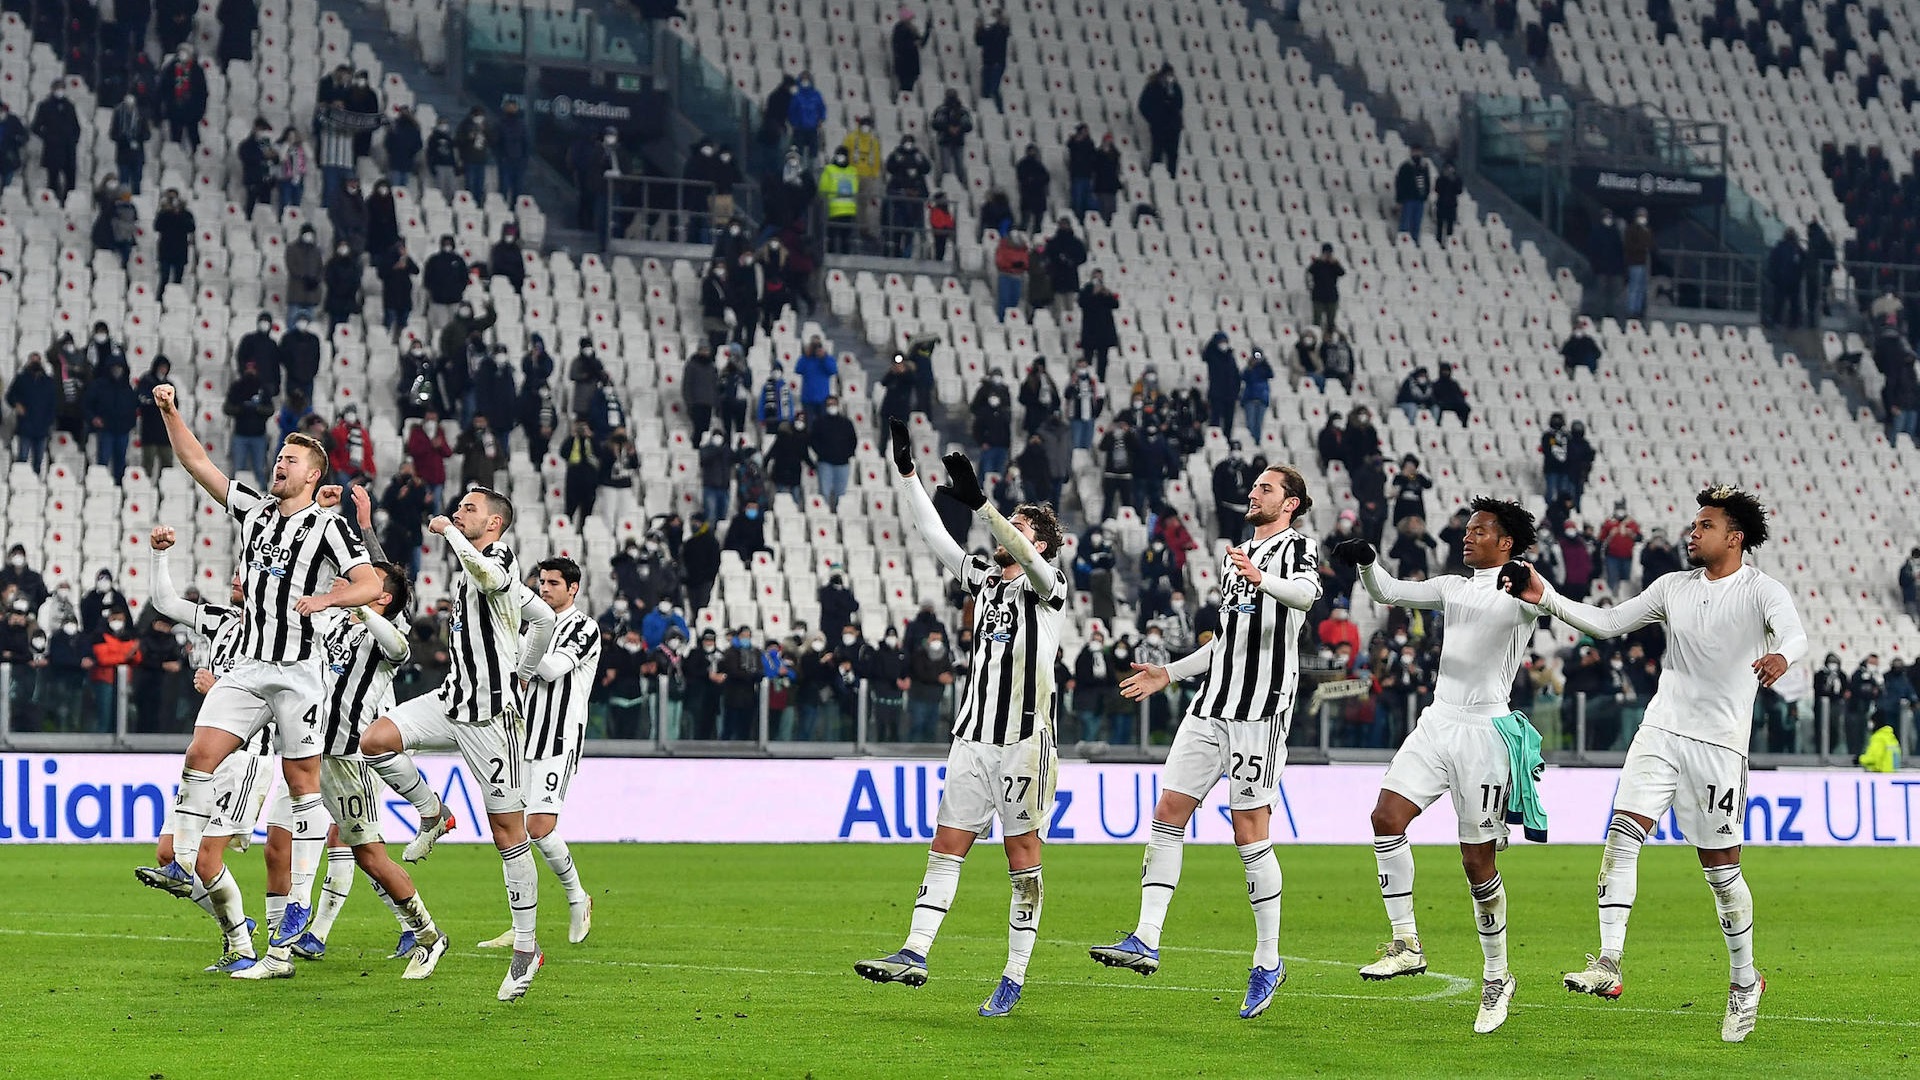 Serie A 2021/2022: Juventus-Udinese 2-0, le foto